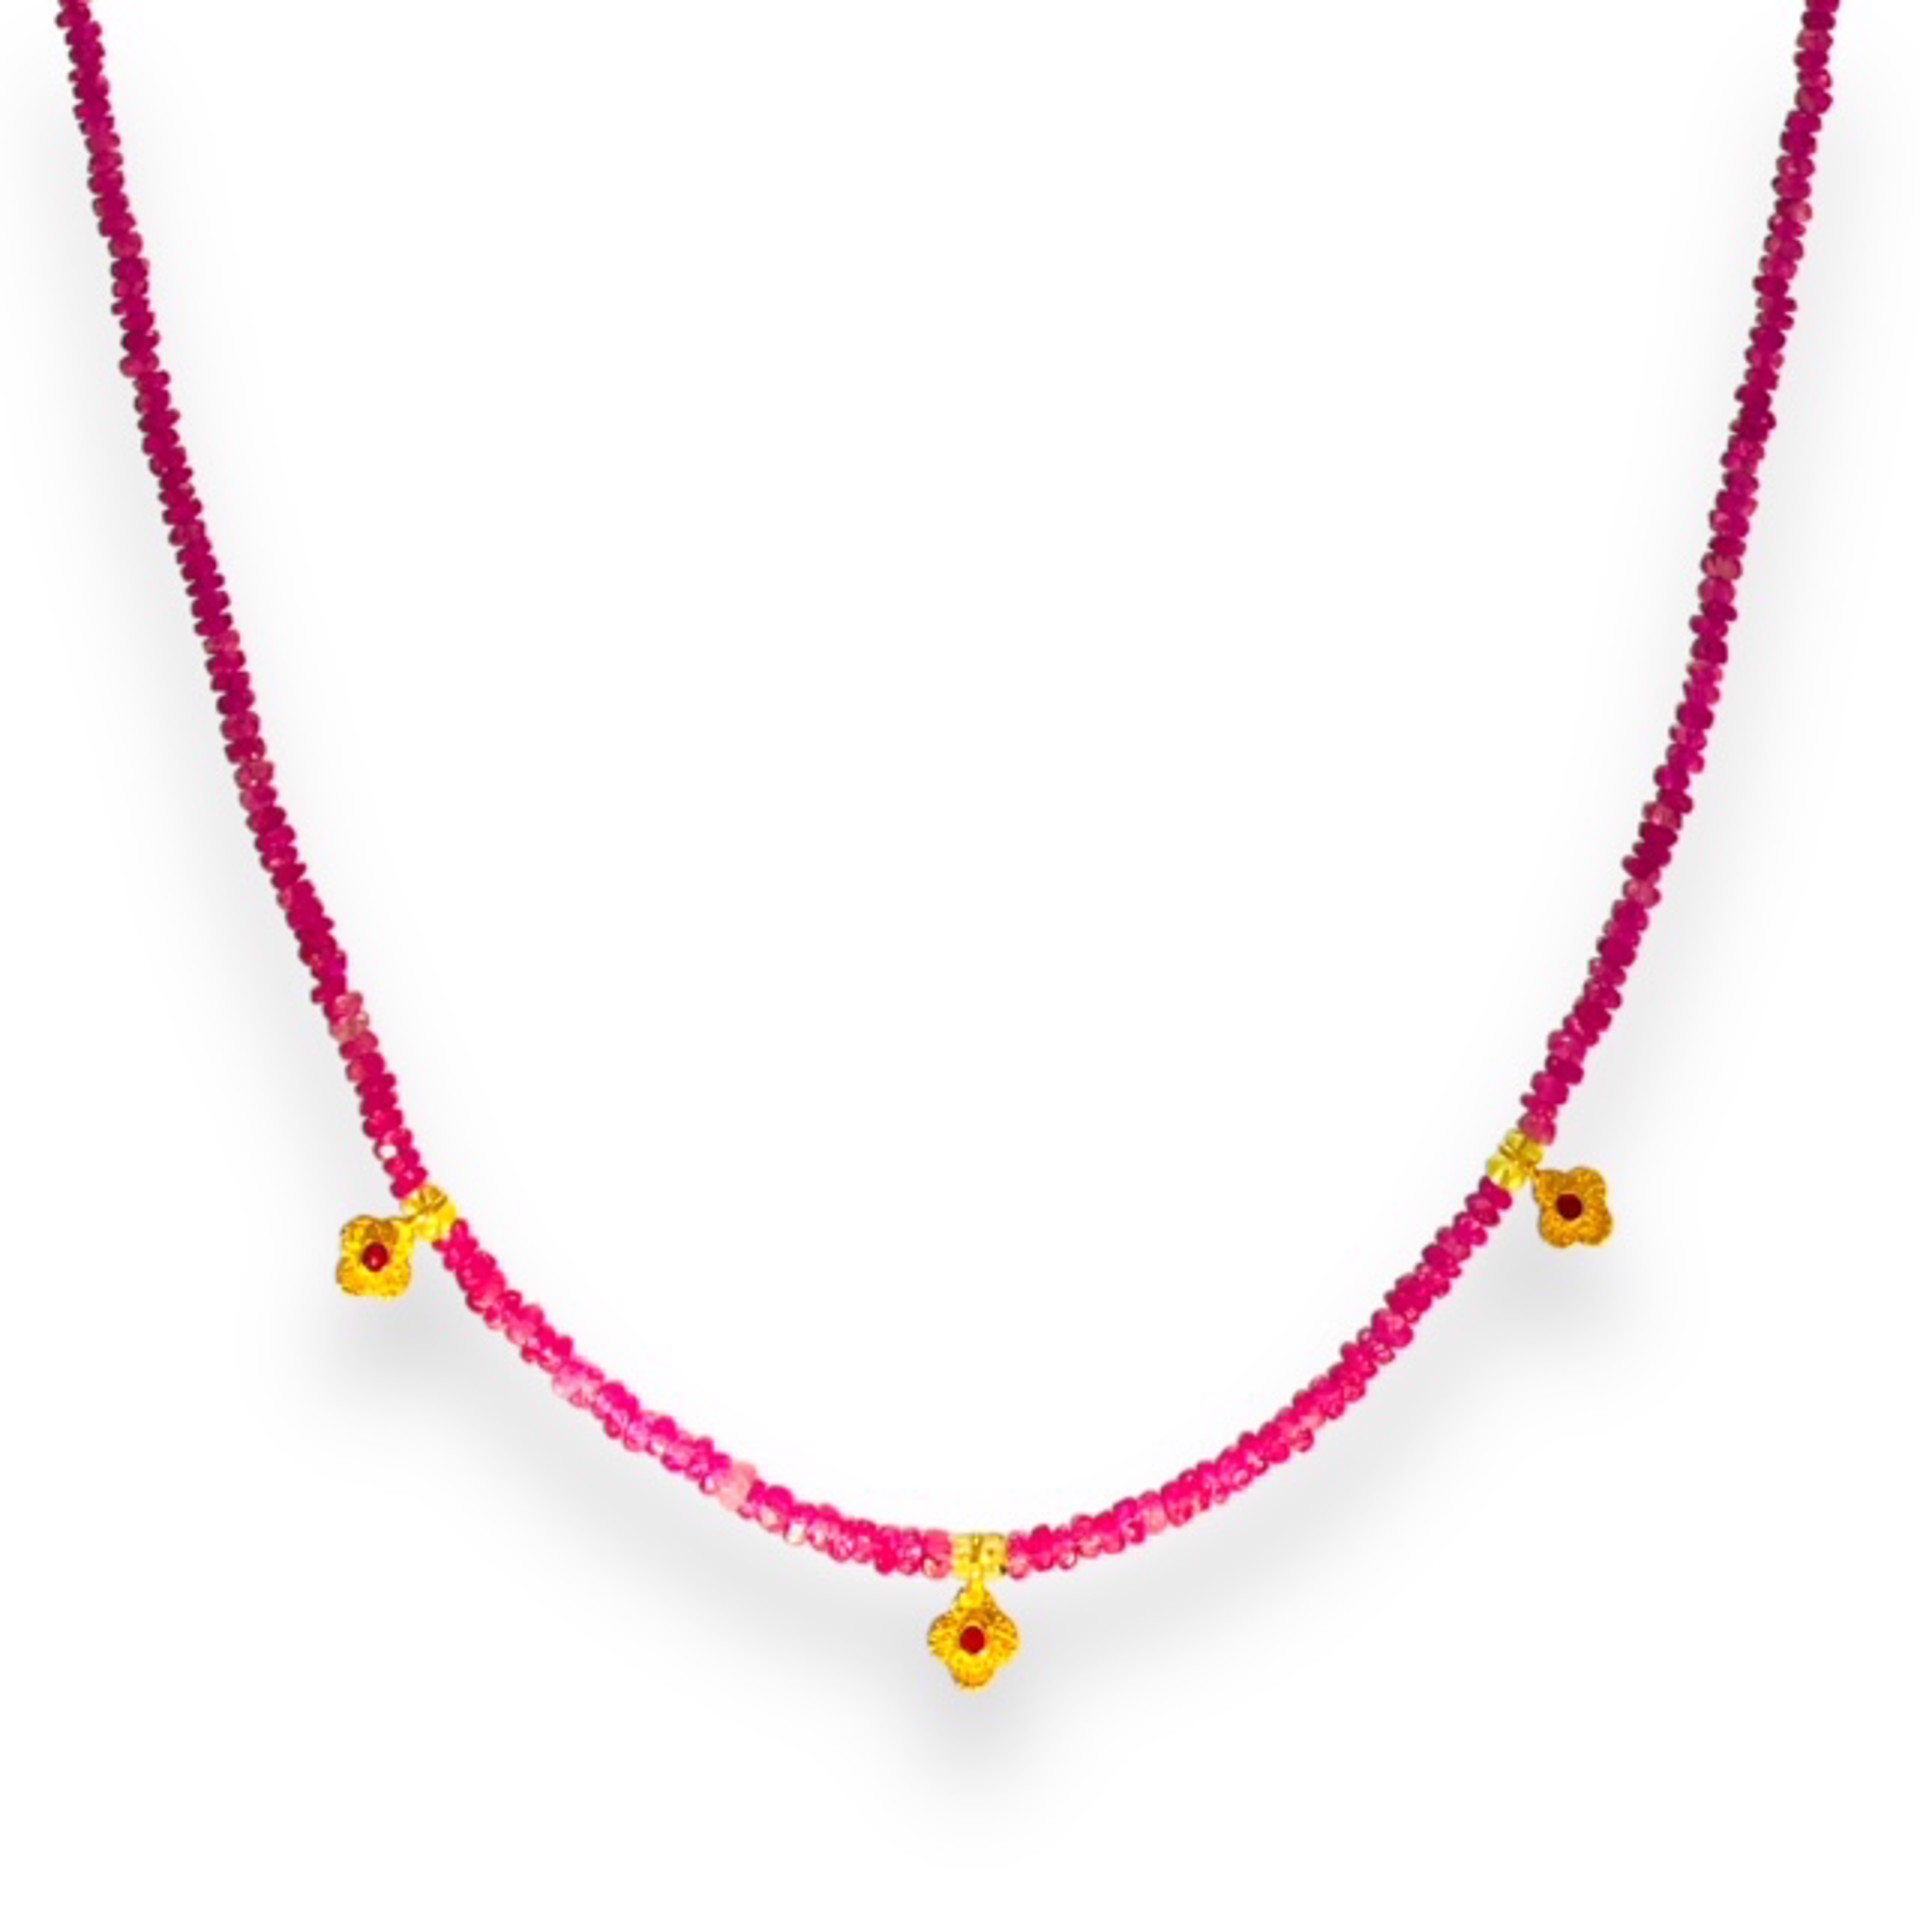 Petal Pink Sapphire Necklace 18k gold 16" by Mara Labell